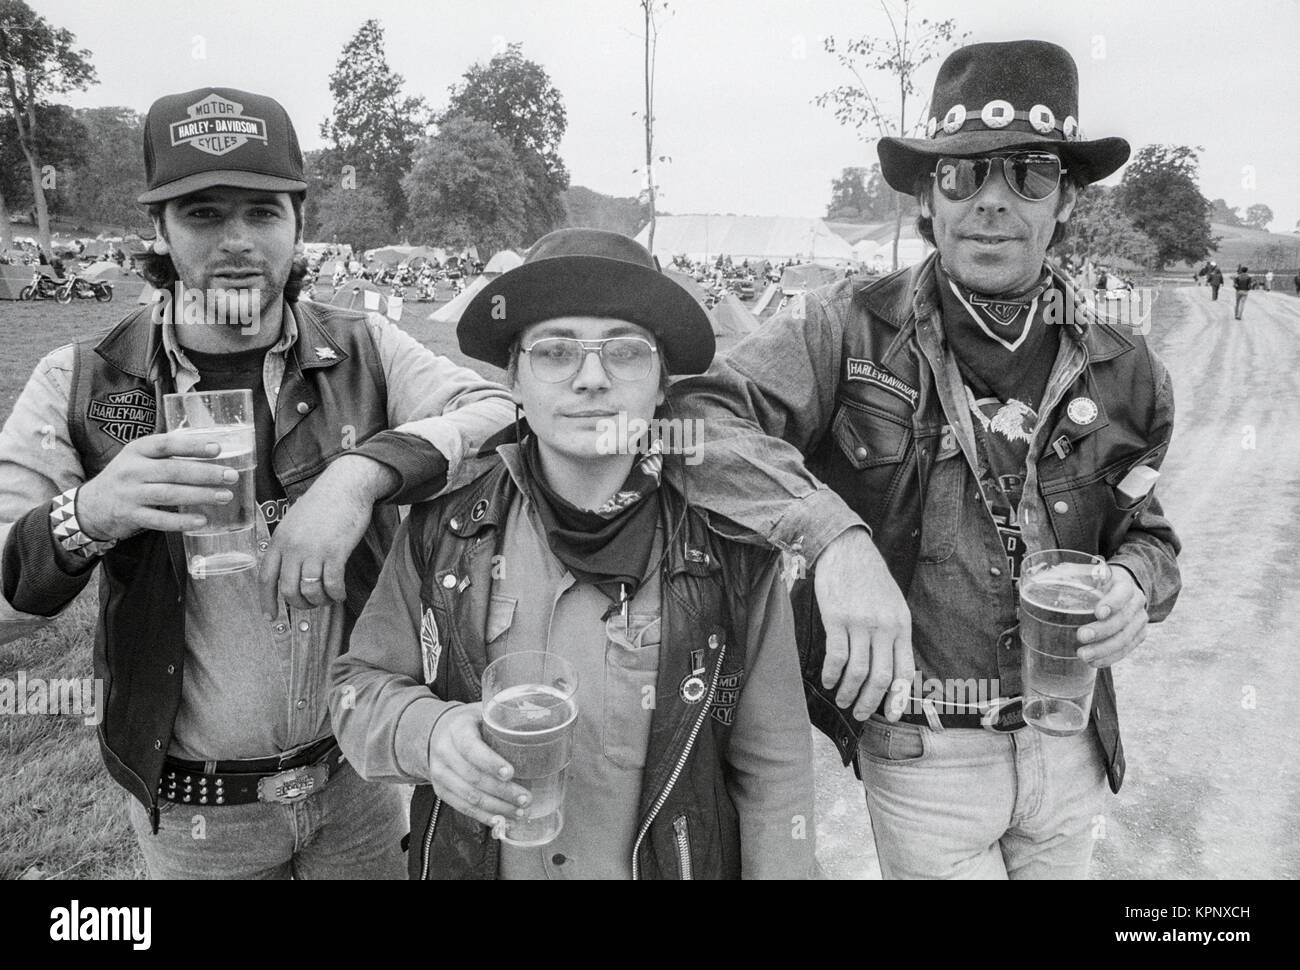 Three bikers drinking beer. Scenes from the Harley Davidson rally in the grounds of Littlecote House, Berkshire, England ion 30th September 1989. The rally was hosted by Peter de Savary who owned the house at that time. Stock Photo